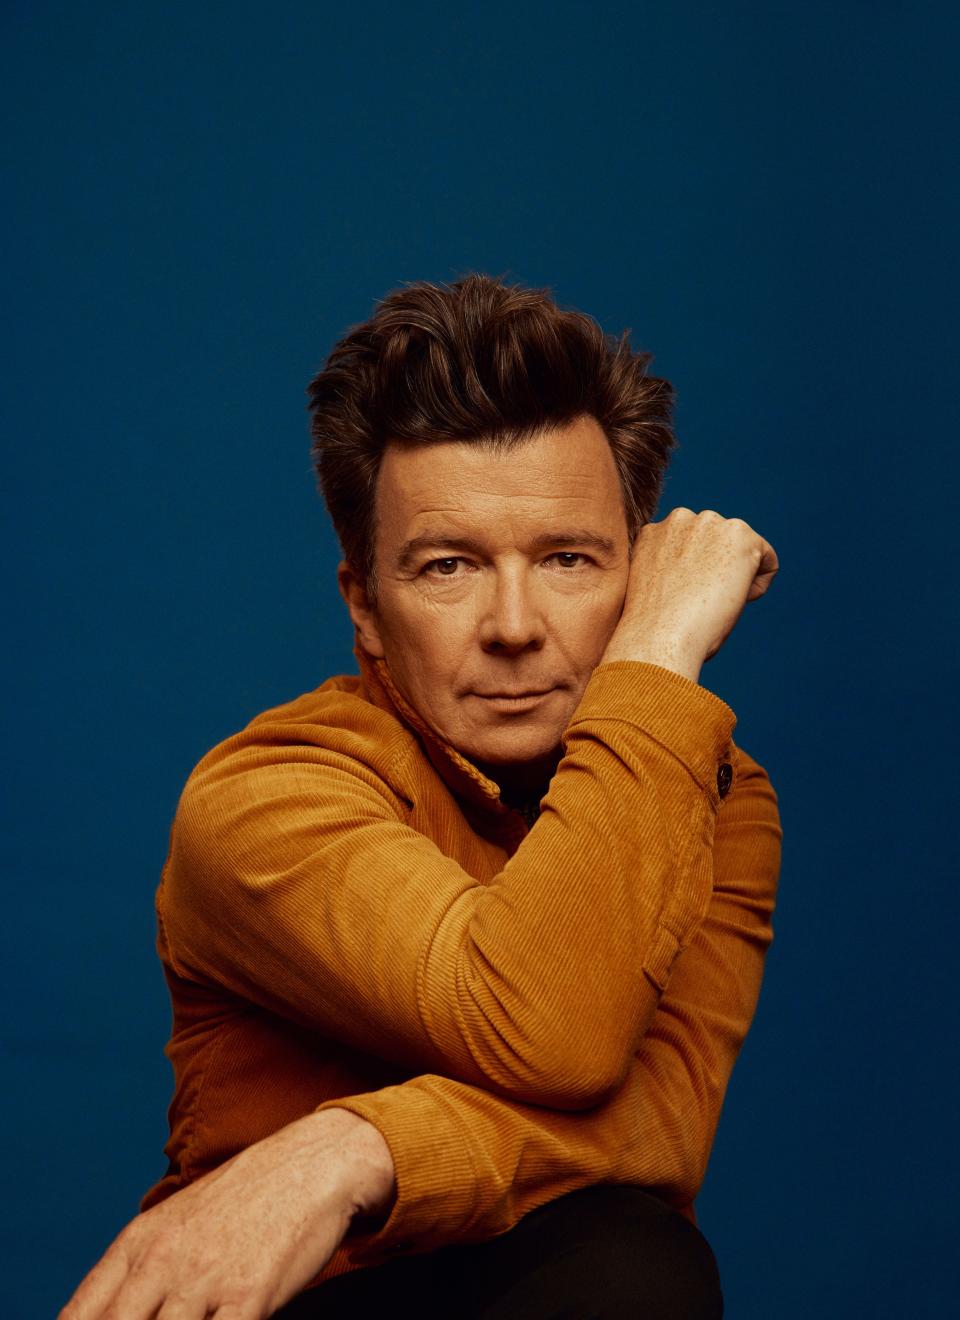 Rick Astley says America "has been a big deal in my life" and cites some of his  favorite singers, Luther Vandross and James Ingram, as influences.